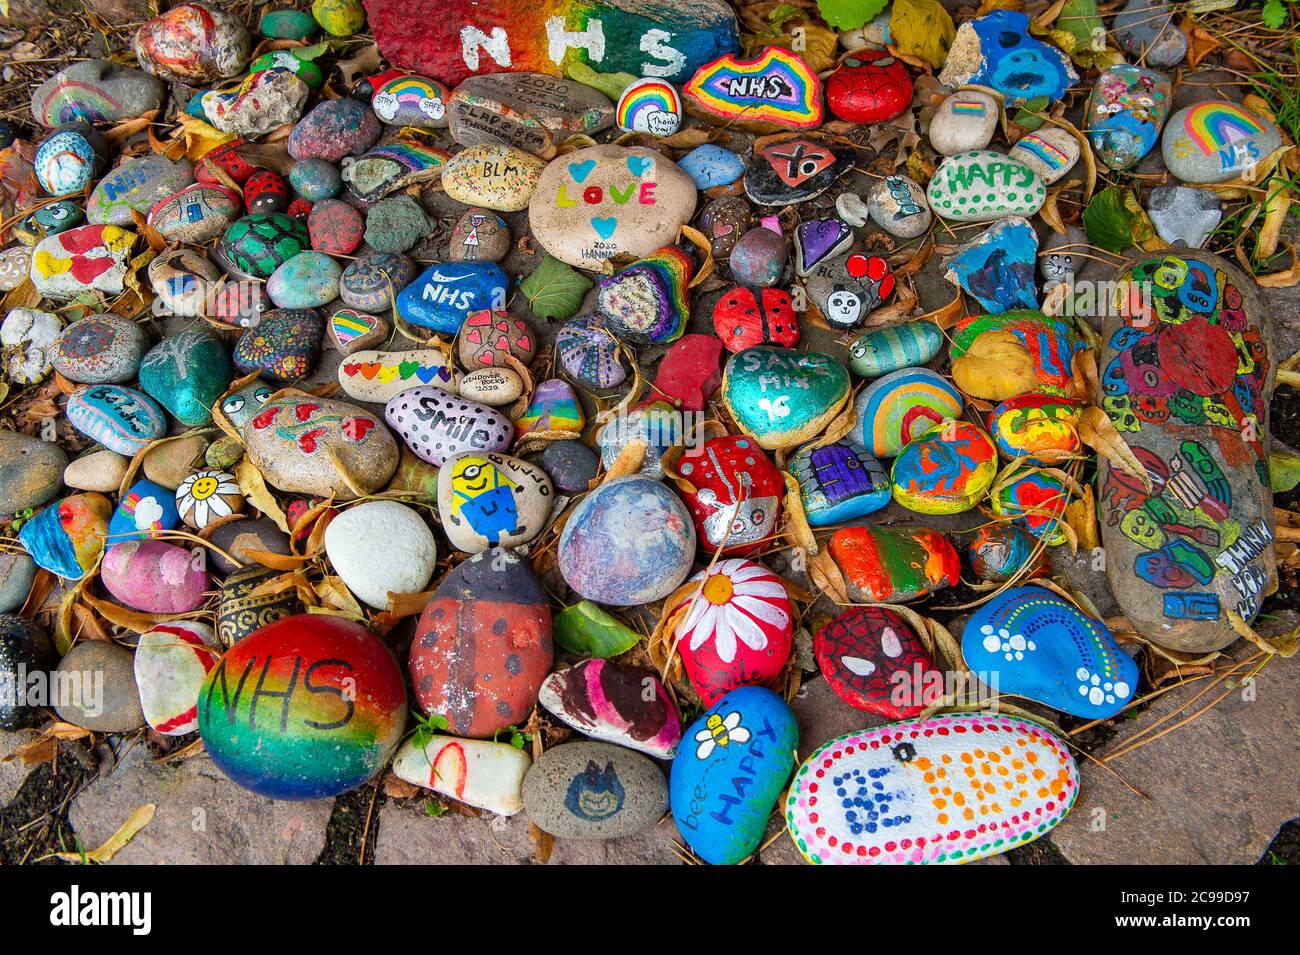 Wendover, Buckinghamshire, UK. 28th July, 2020. Wendover Rocks. Brightly painted stones remain in Wendover town centre following the Coronavirus lockdown giving messages of thanks and hope to the NHS and key workers. Credit: Maureen McLean/Alamy Stock Photo